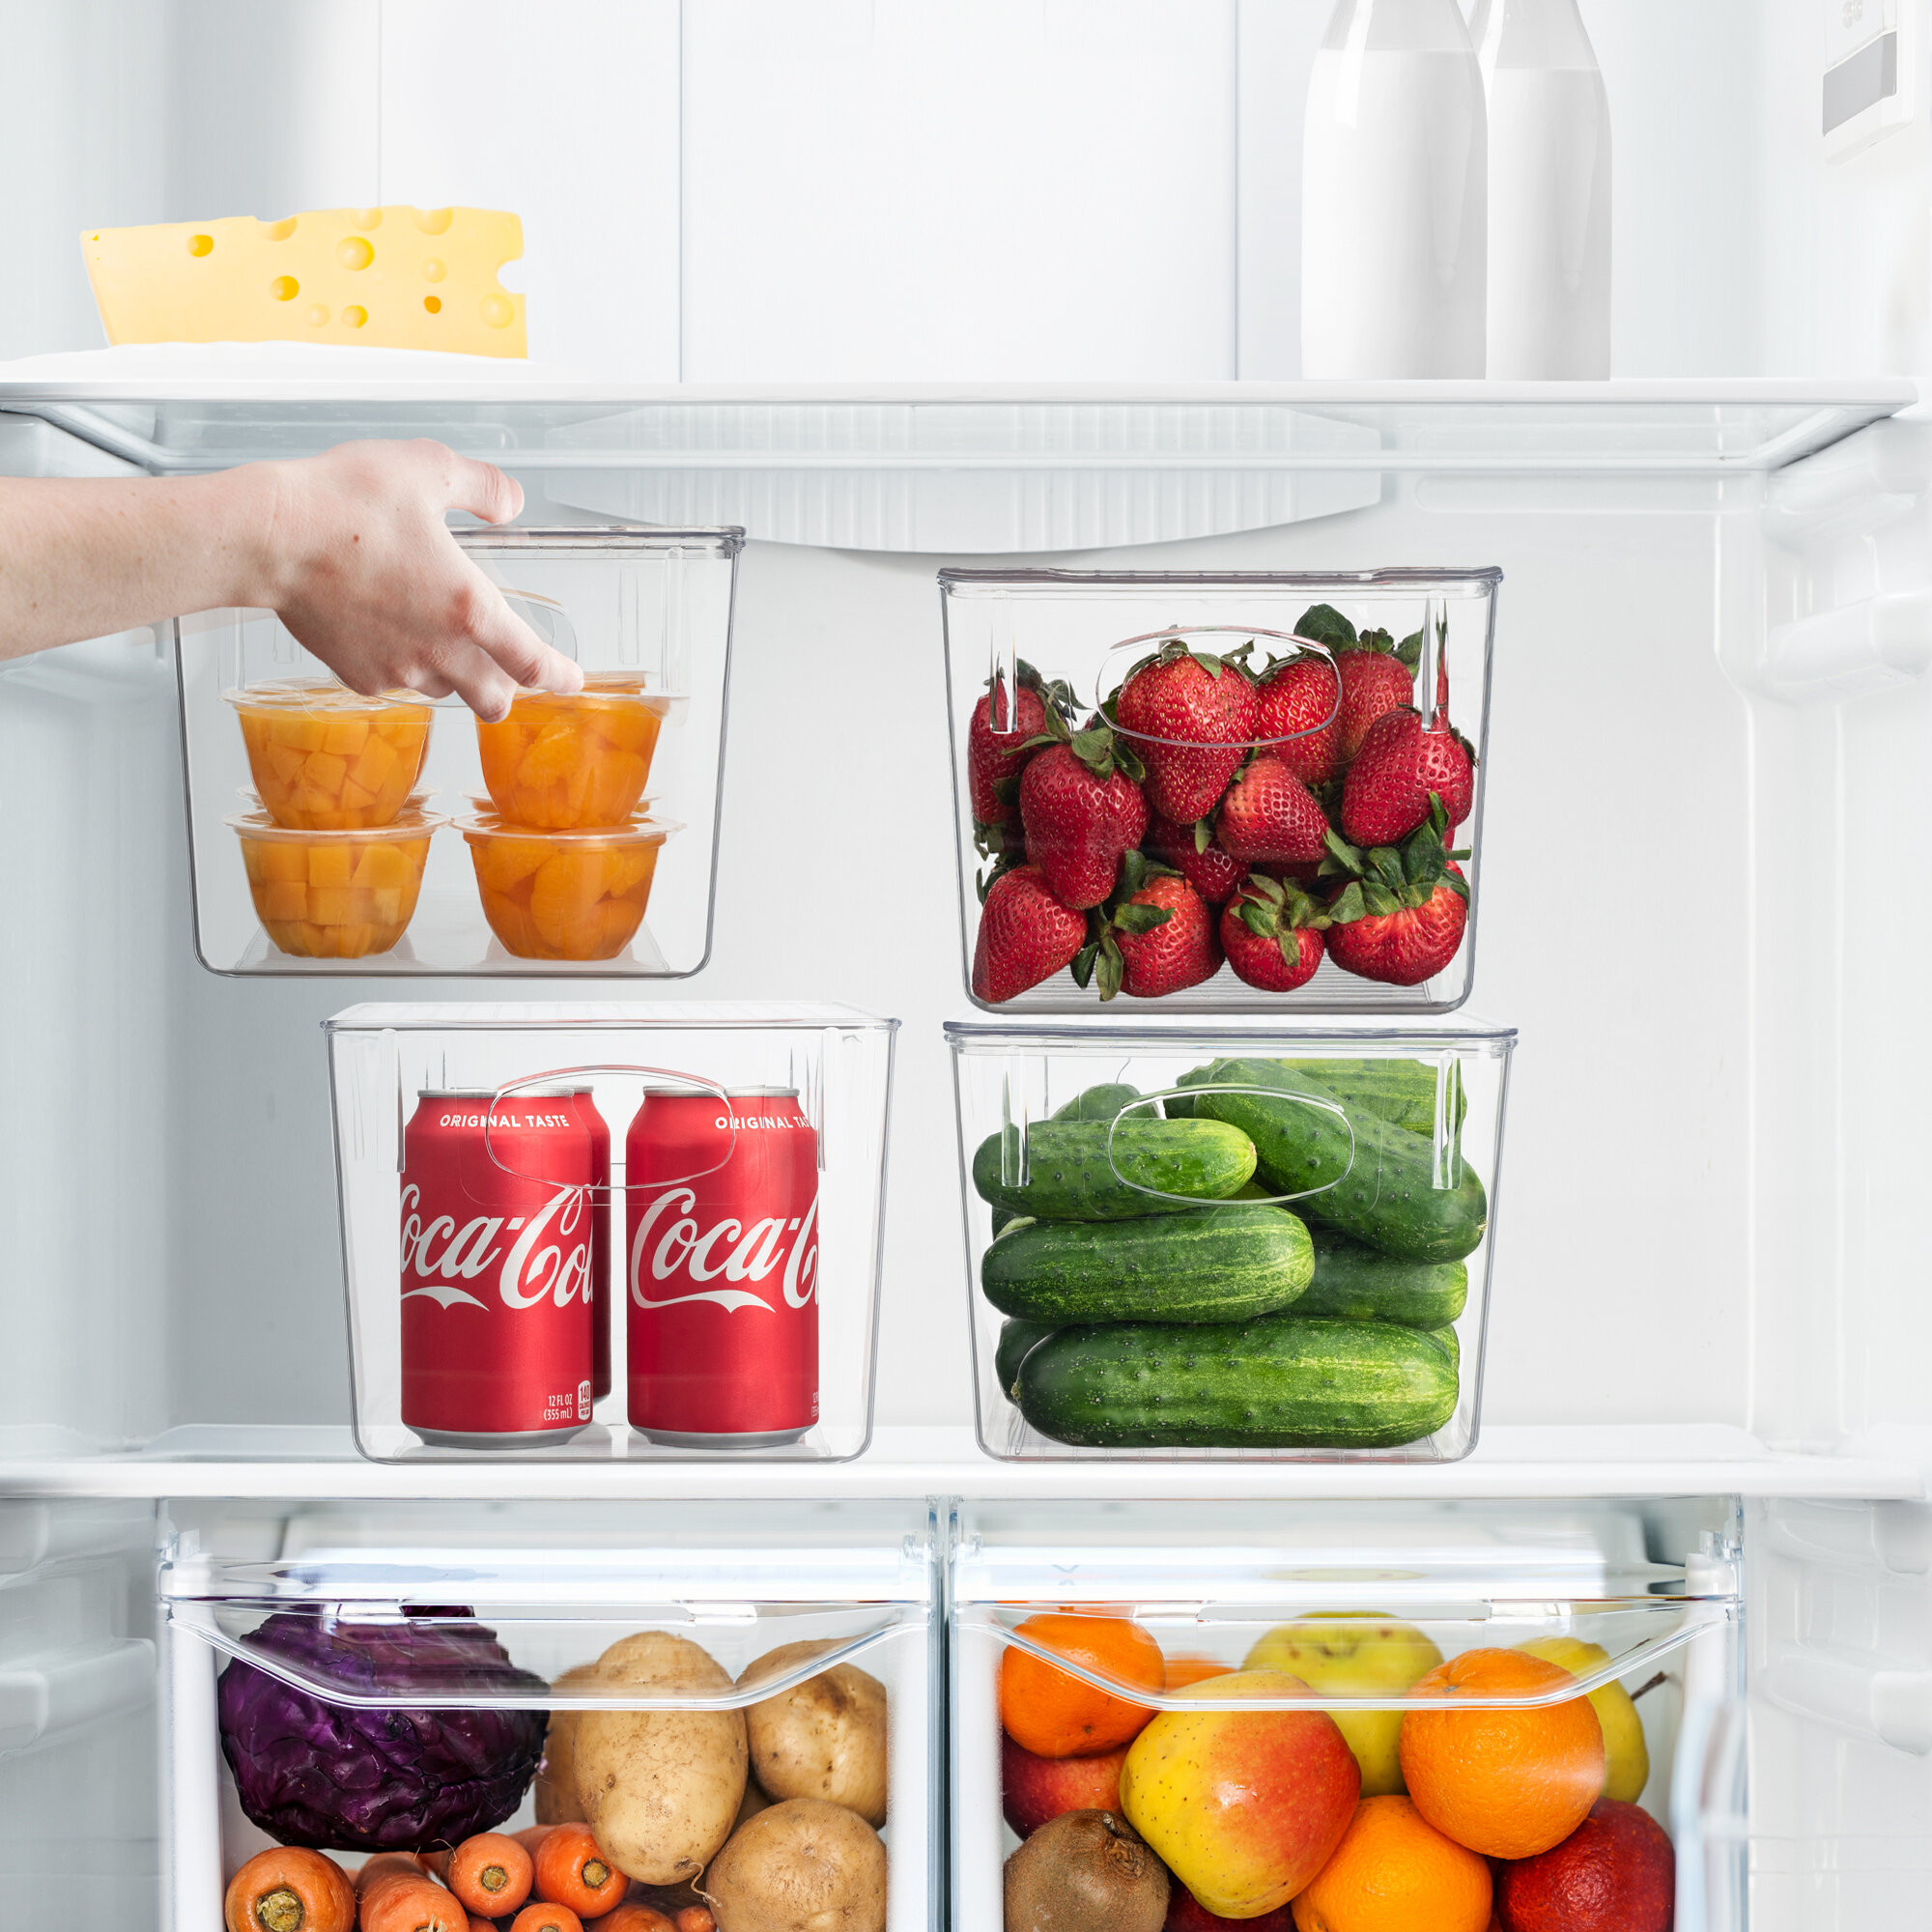 Sorbus Fridge Drawers - Clear Stackable Pull Out Refrigerator